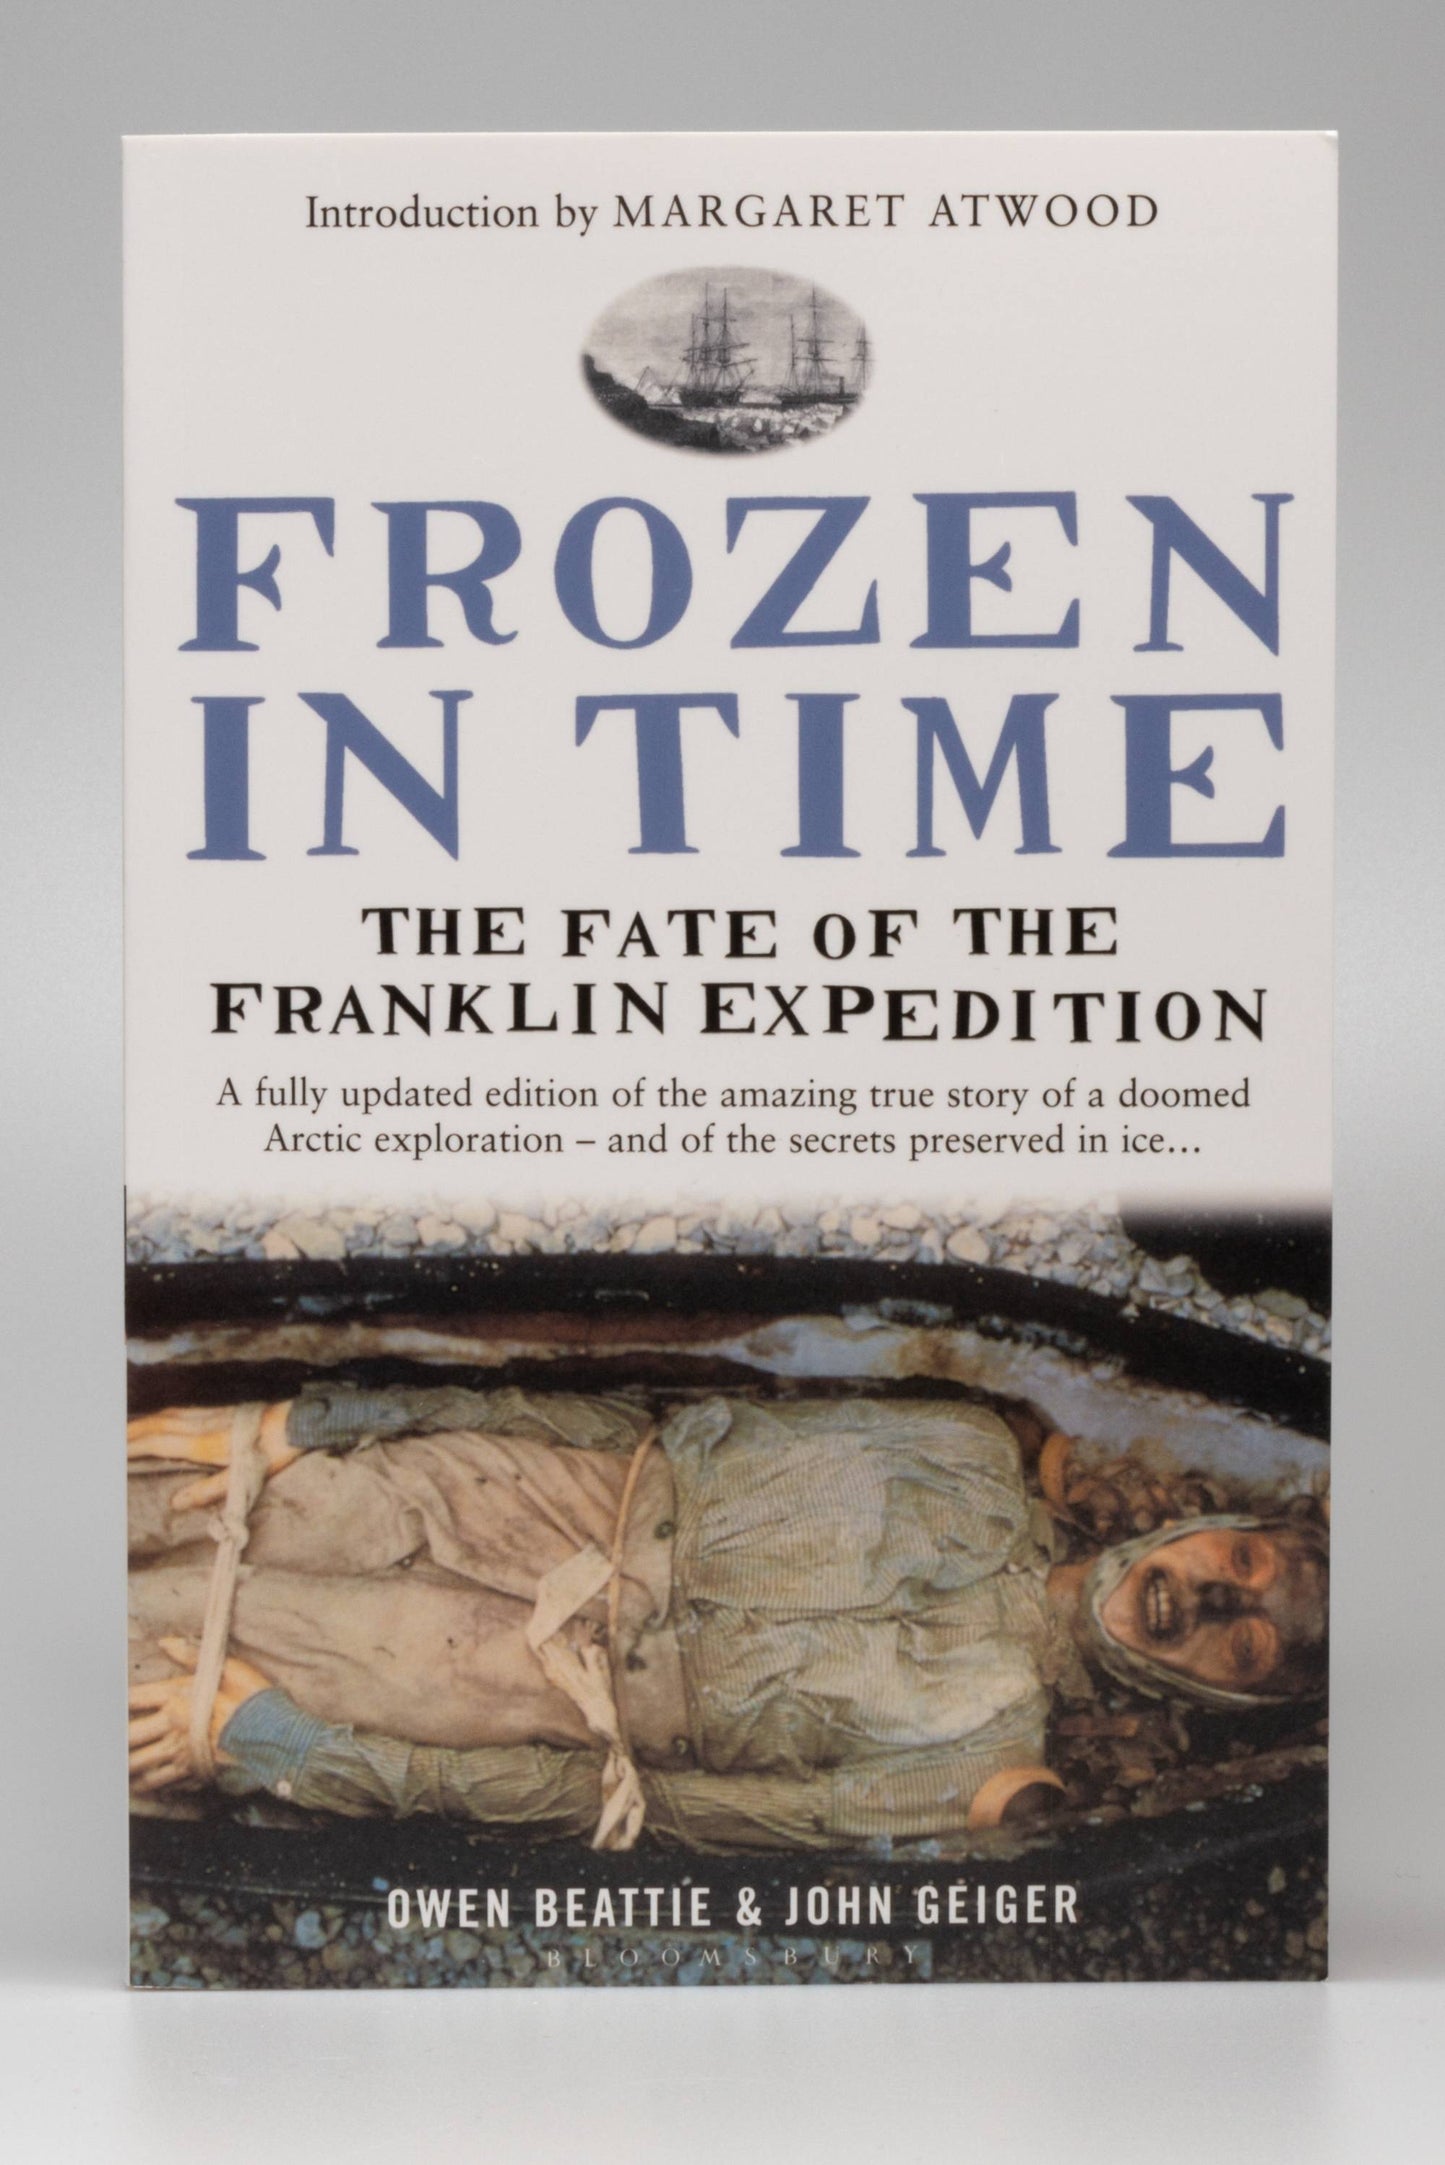 Frozen in Time: The fate of the Franklin Expedition